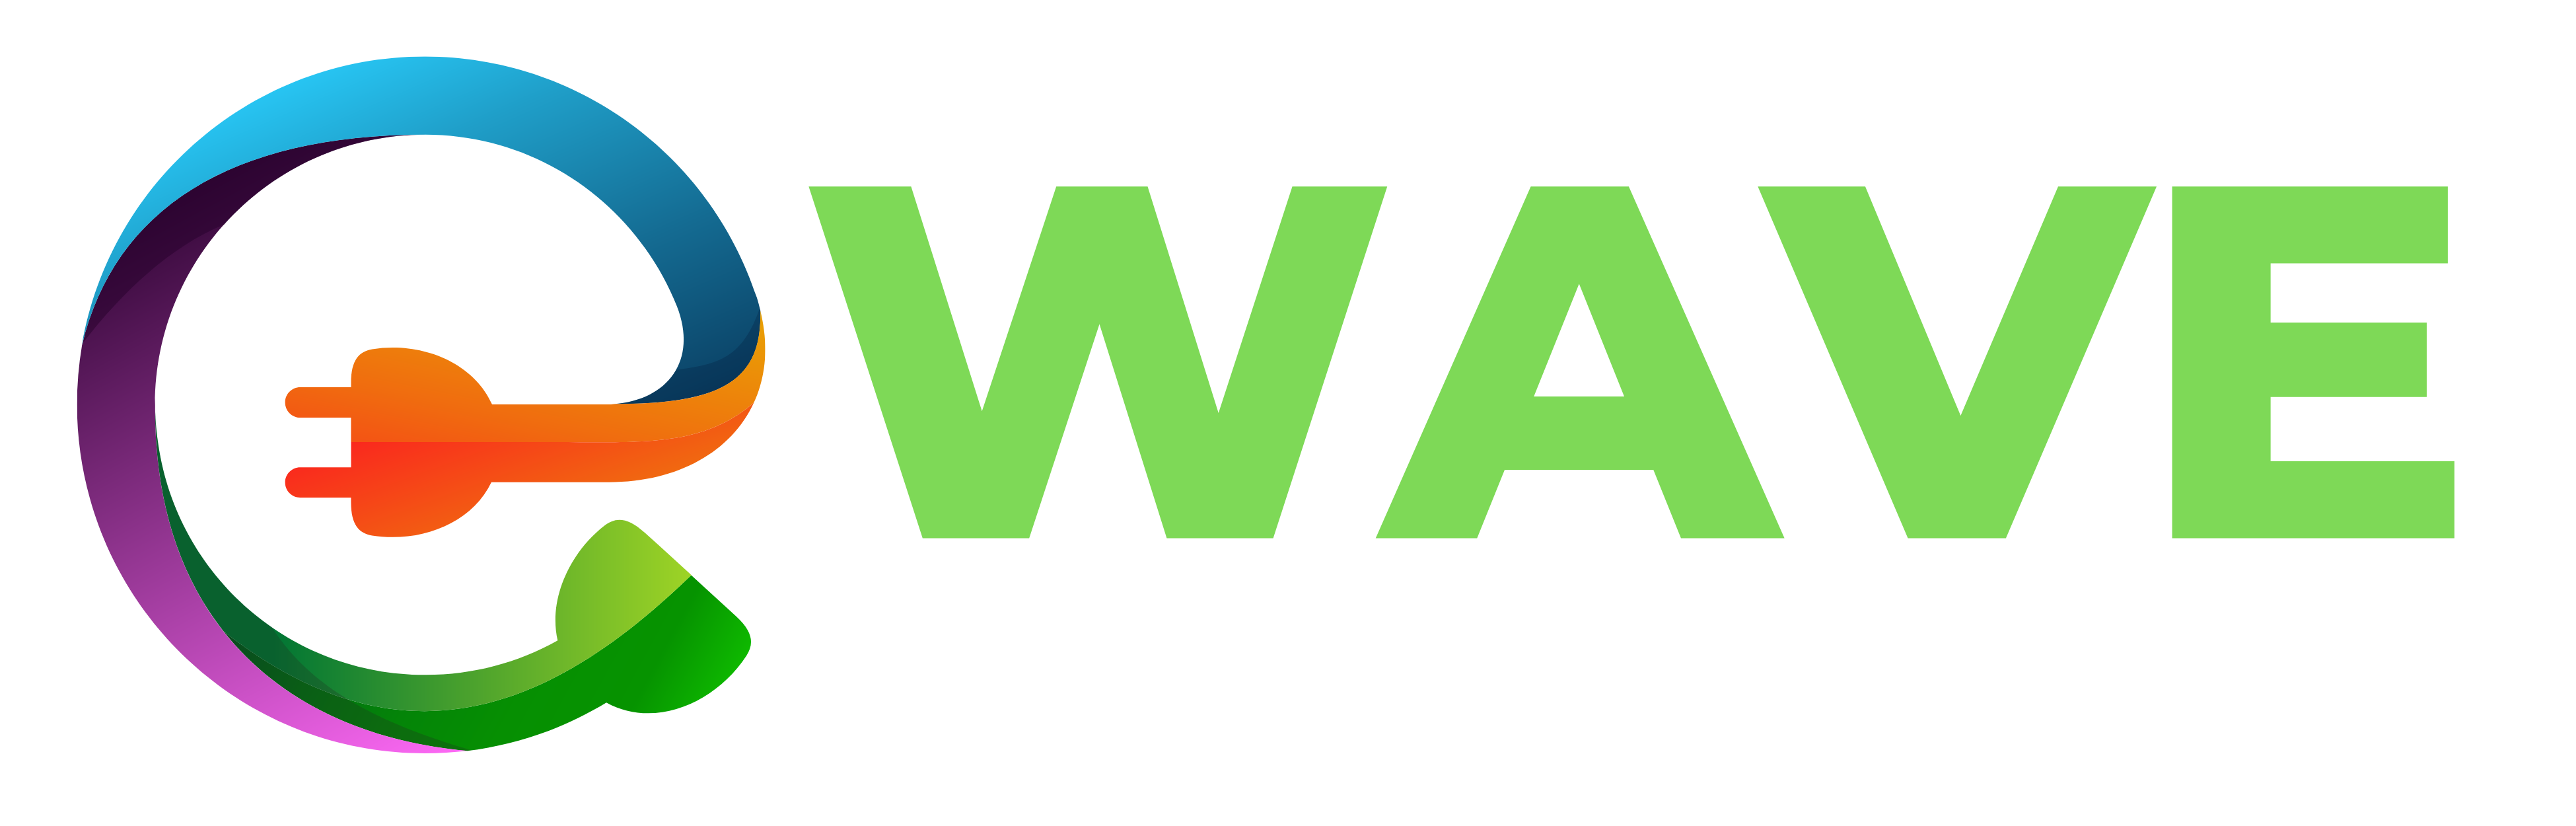 E-Wave Radio by Differenting